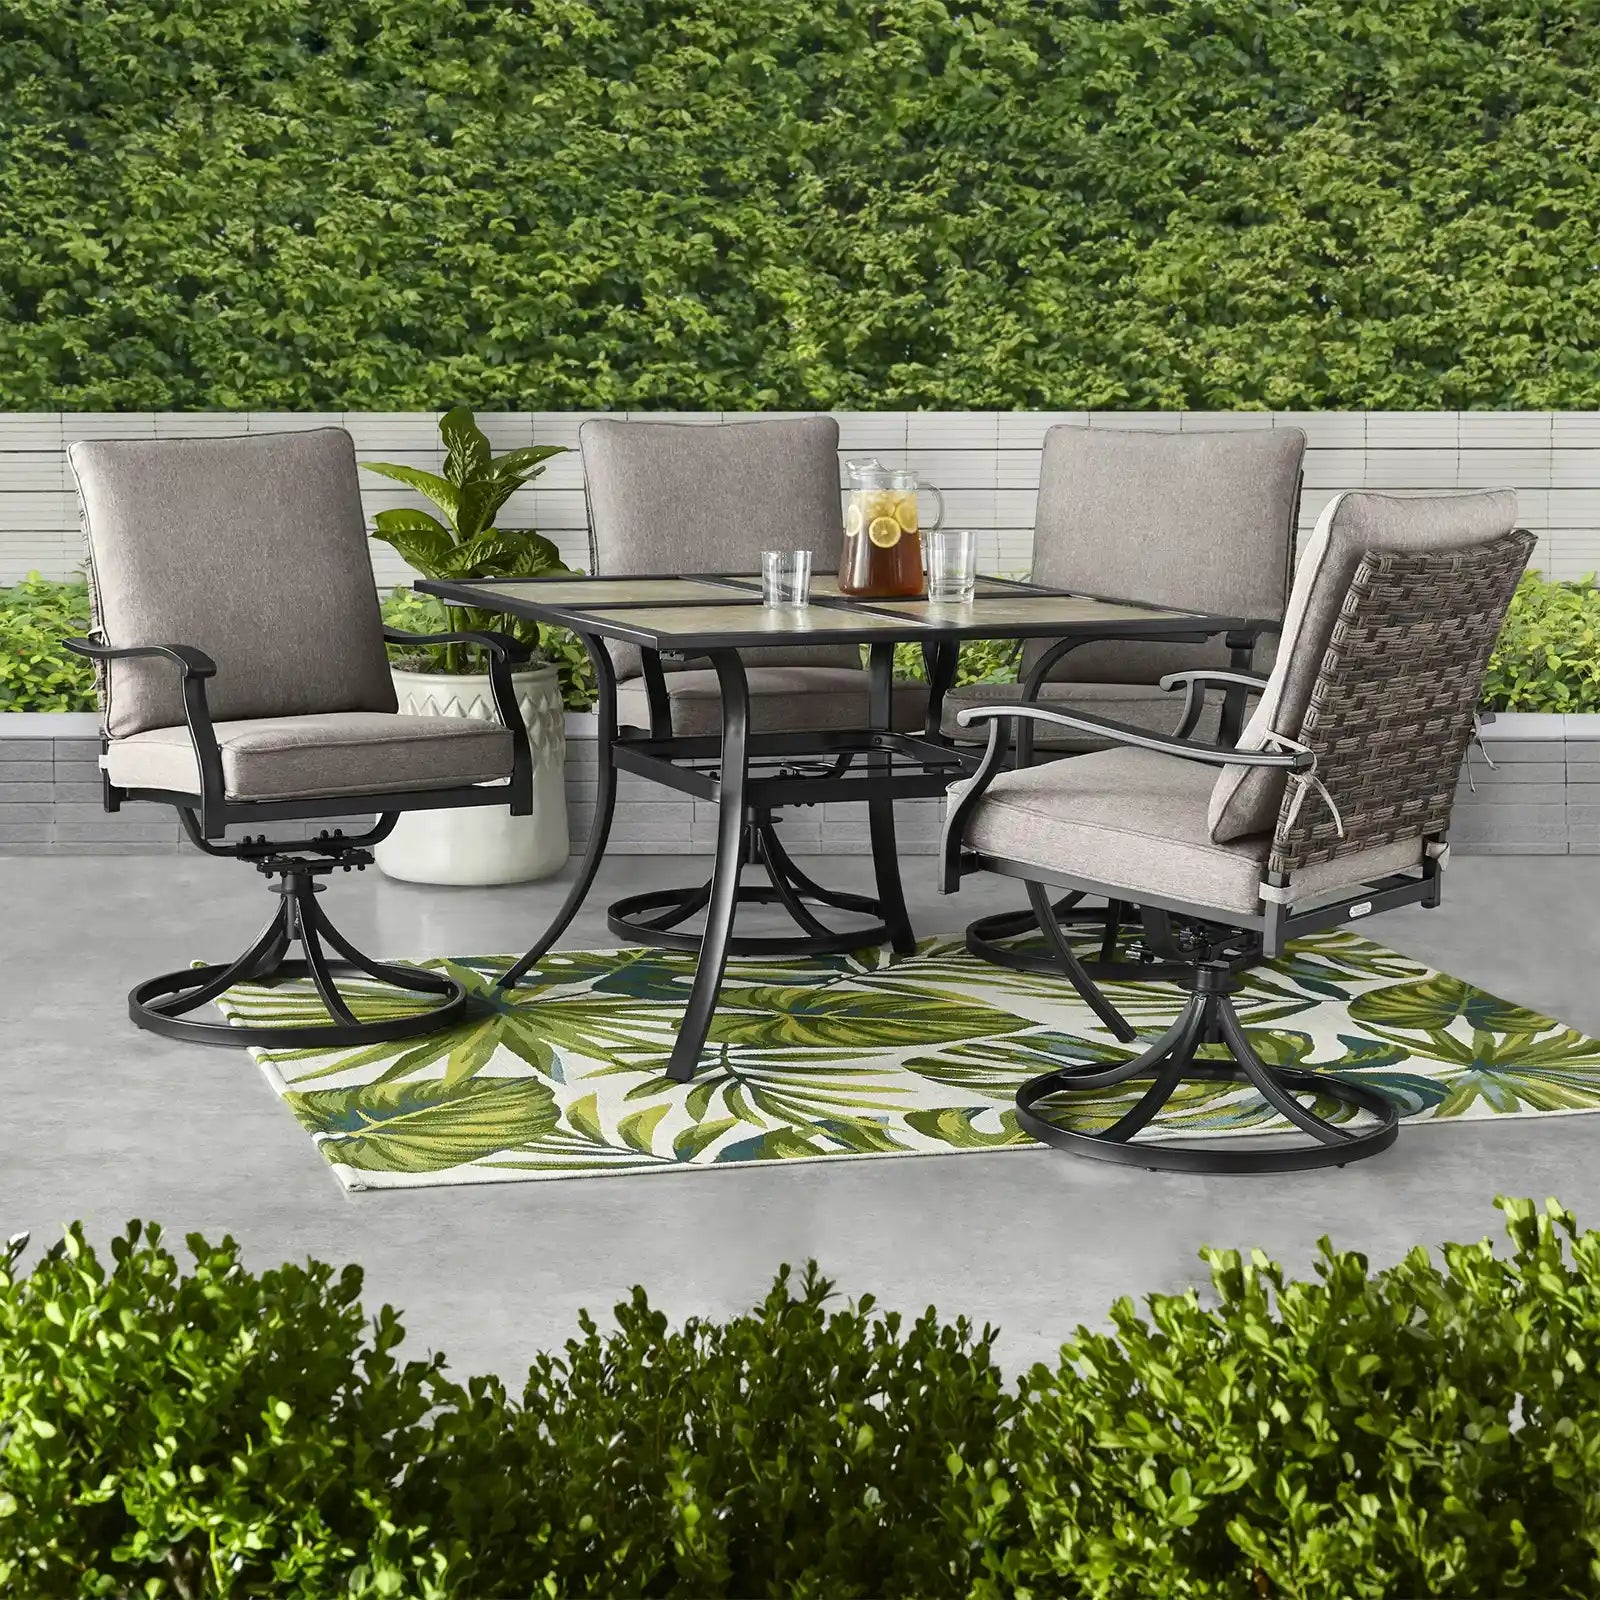 Gray Outdoor Dining Table and Chairs - Outdoor Furniture Sets